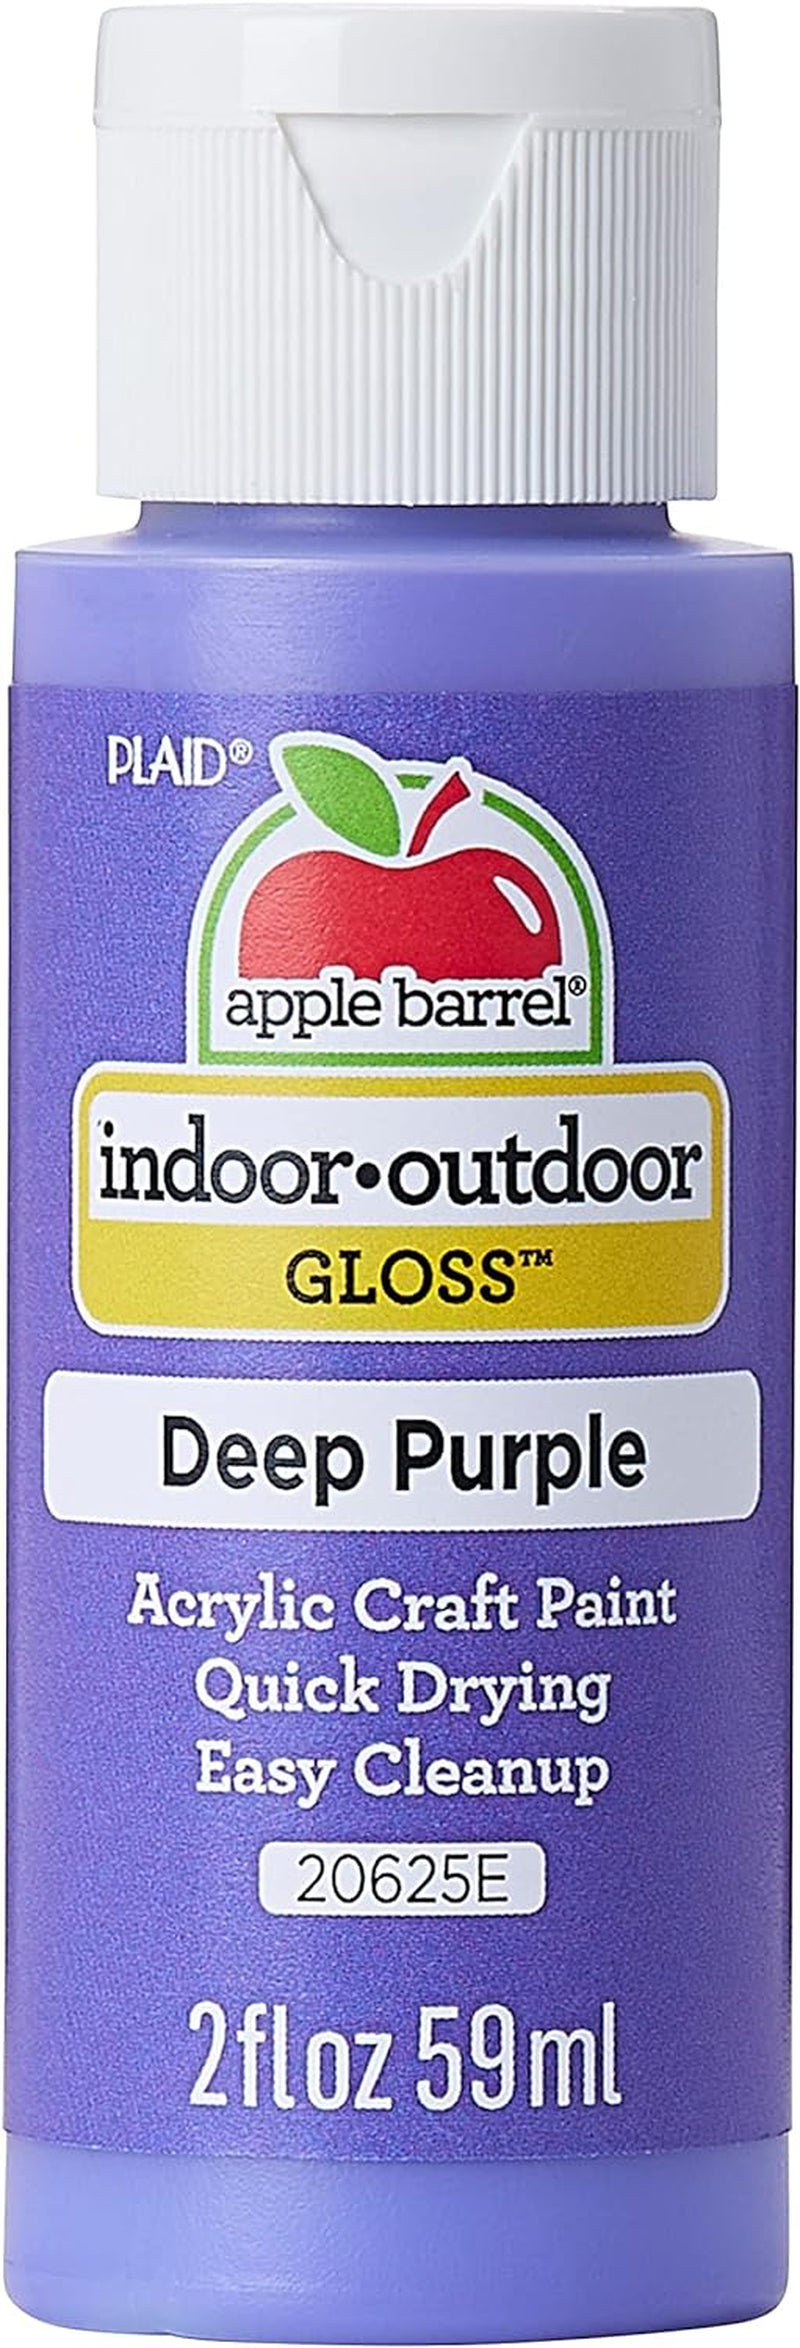 Gloss Acrylic Paint in Assorted Colors (2-Ounce), 20621 White